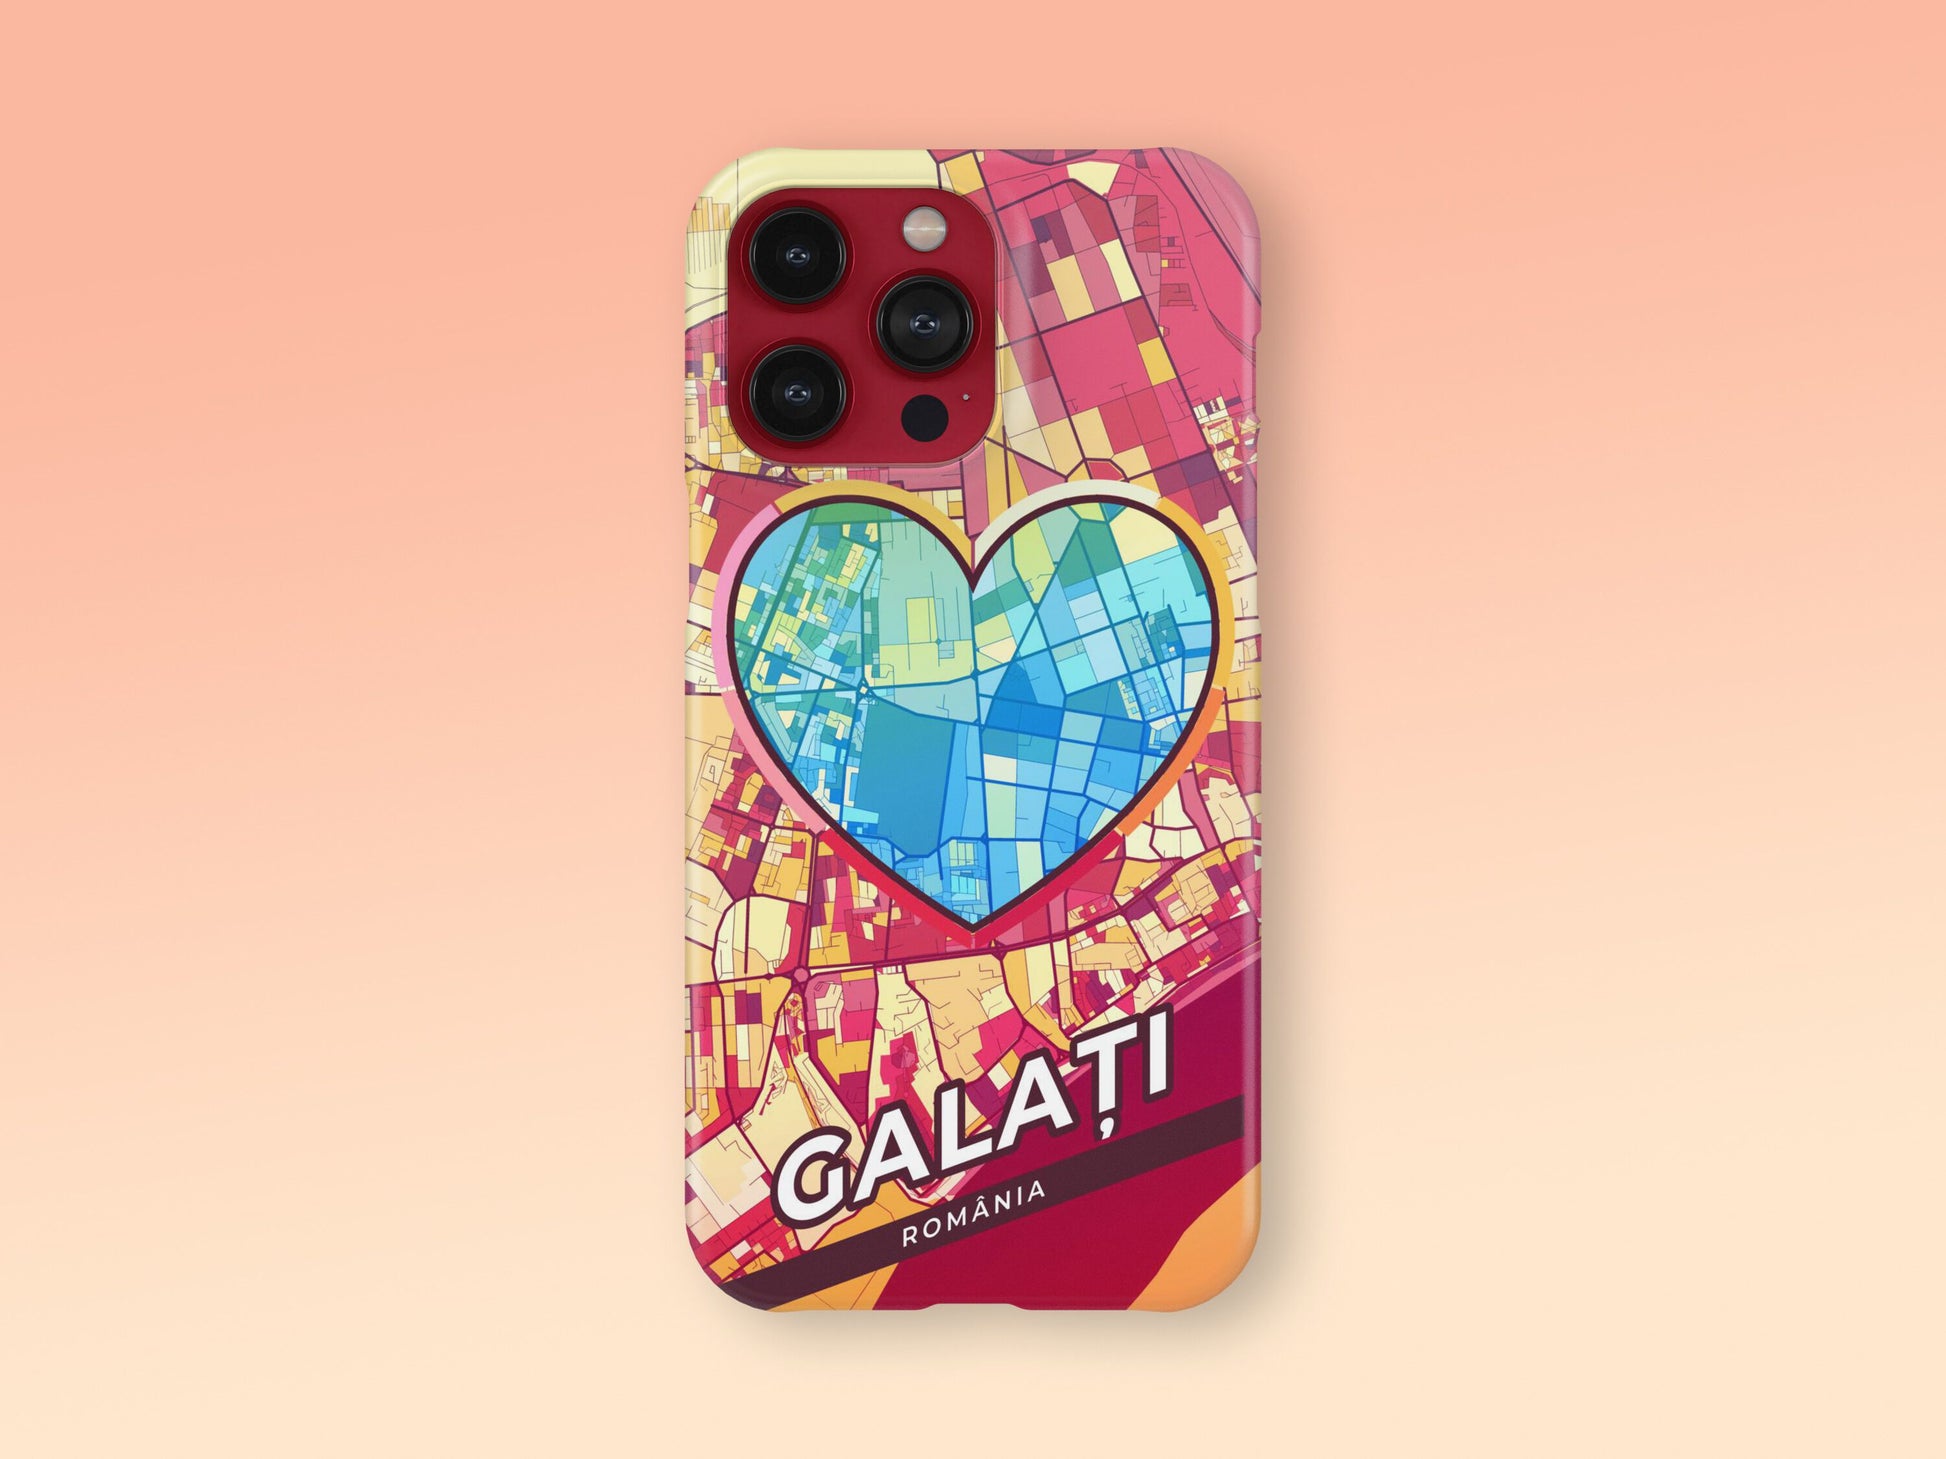 Galați Romania slim phone case with colorful icon. Birthday, wedding or housewarming gift. Couple match cases. 2